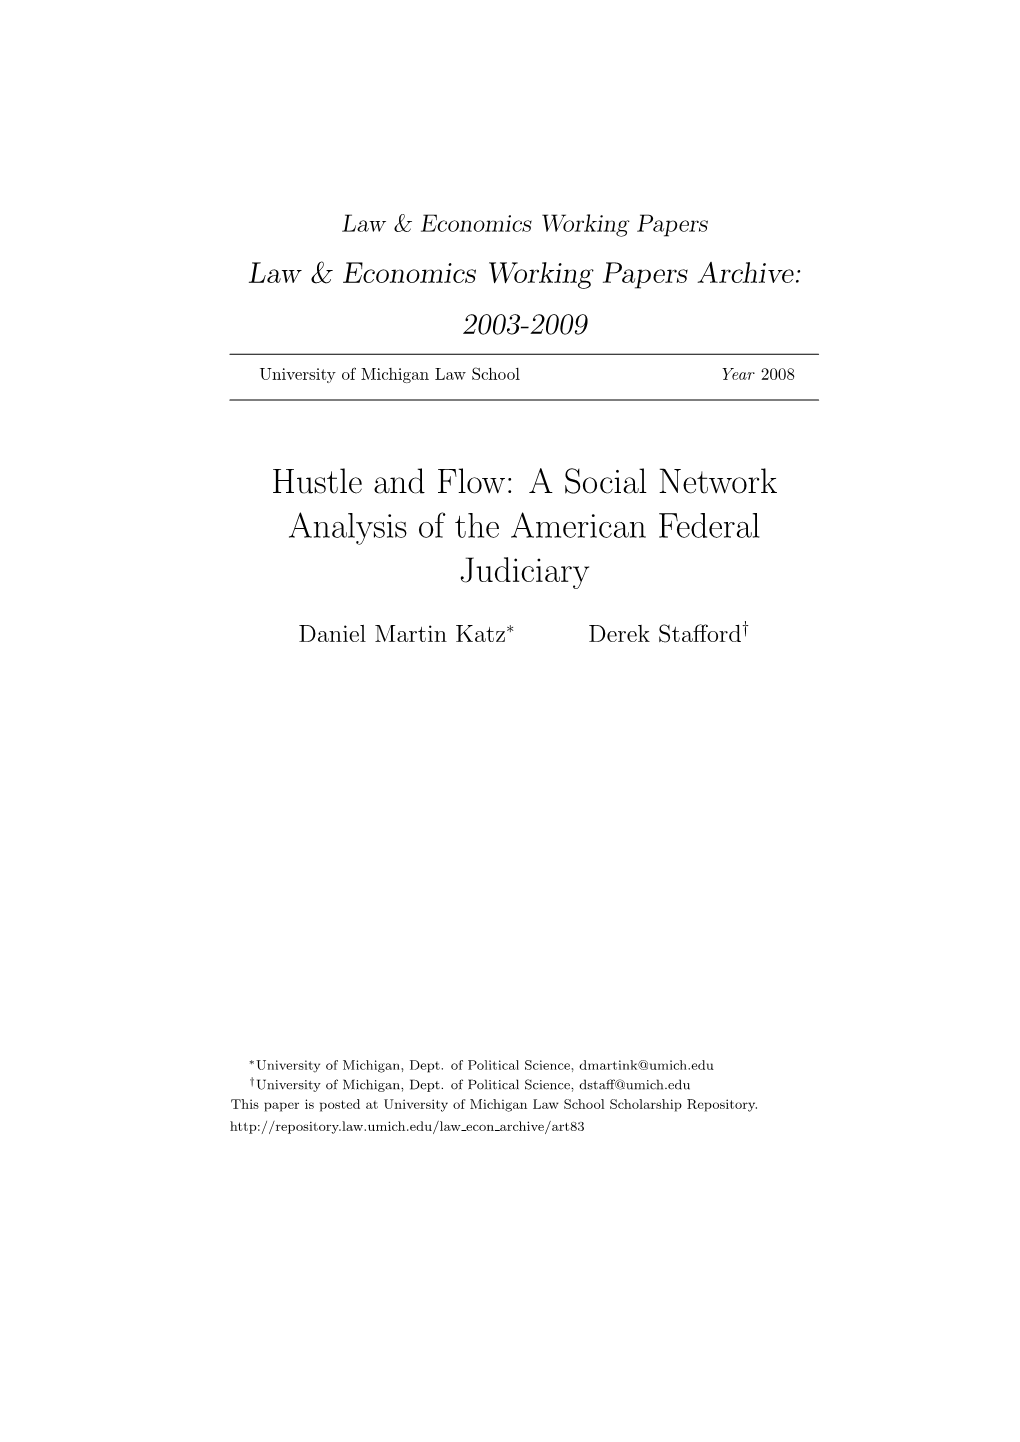 A Social Network Analysis of the American Federal Judiciary